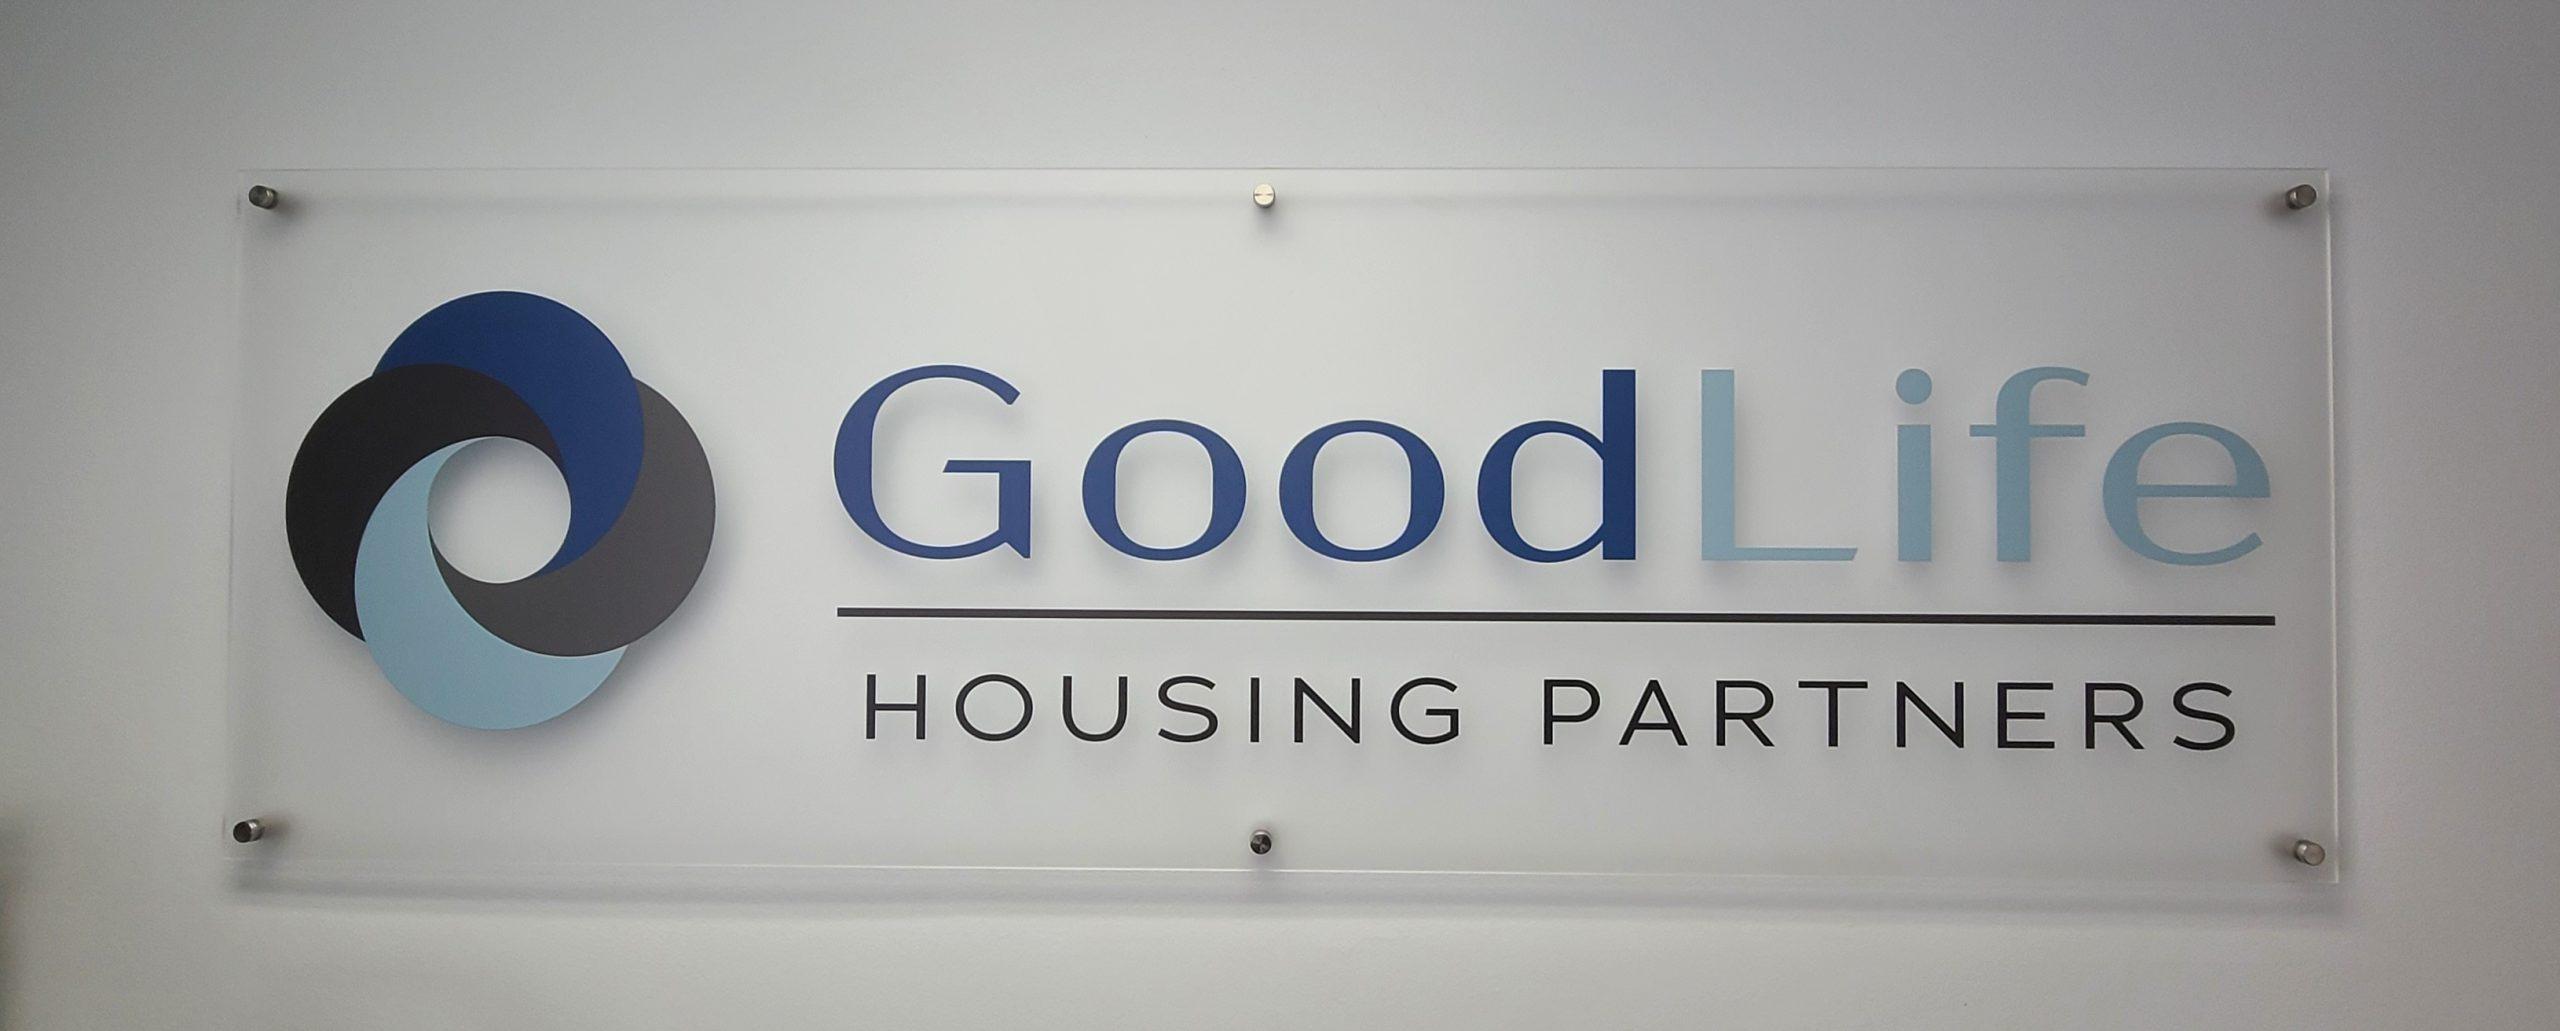 This is the acrylic panel lobby sign we fabricated and installed for GoodLife Housing's office in Los Angeles. Contact Premium Sign Solutions. Los Angeles sign company serving San Fernando Valley, Tarzana, Pomona and all of Southern California. Premium Sign Solutions Specializing in Storefront Signs, Lobby Signs, Indoor Signs and Outdoor Signs for Businesses.